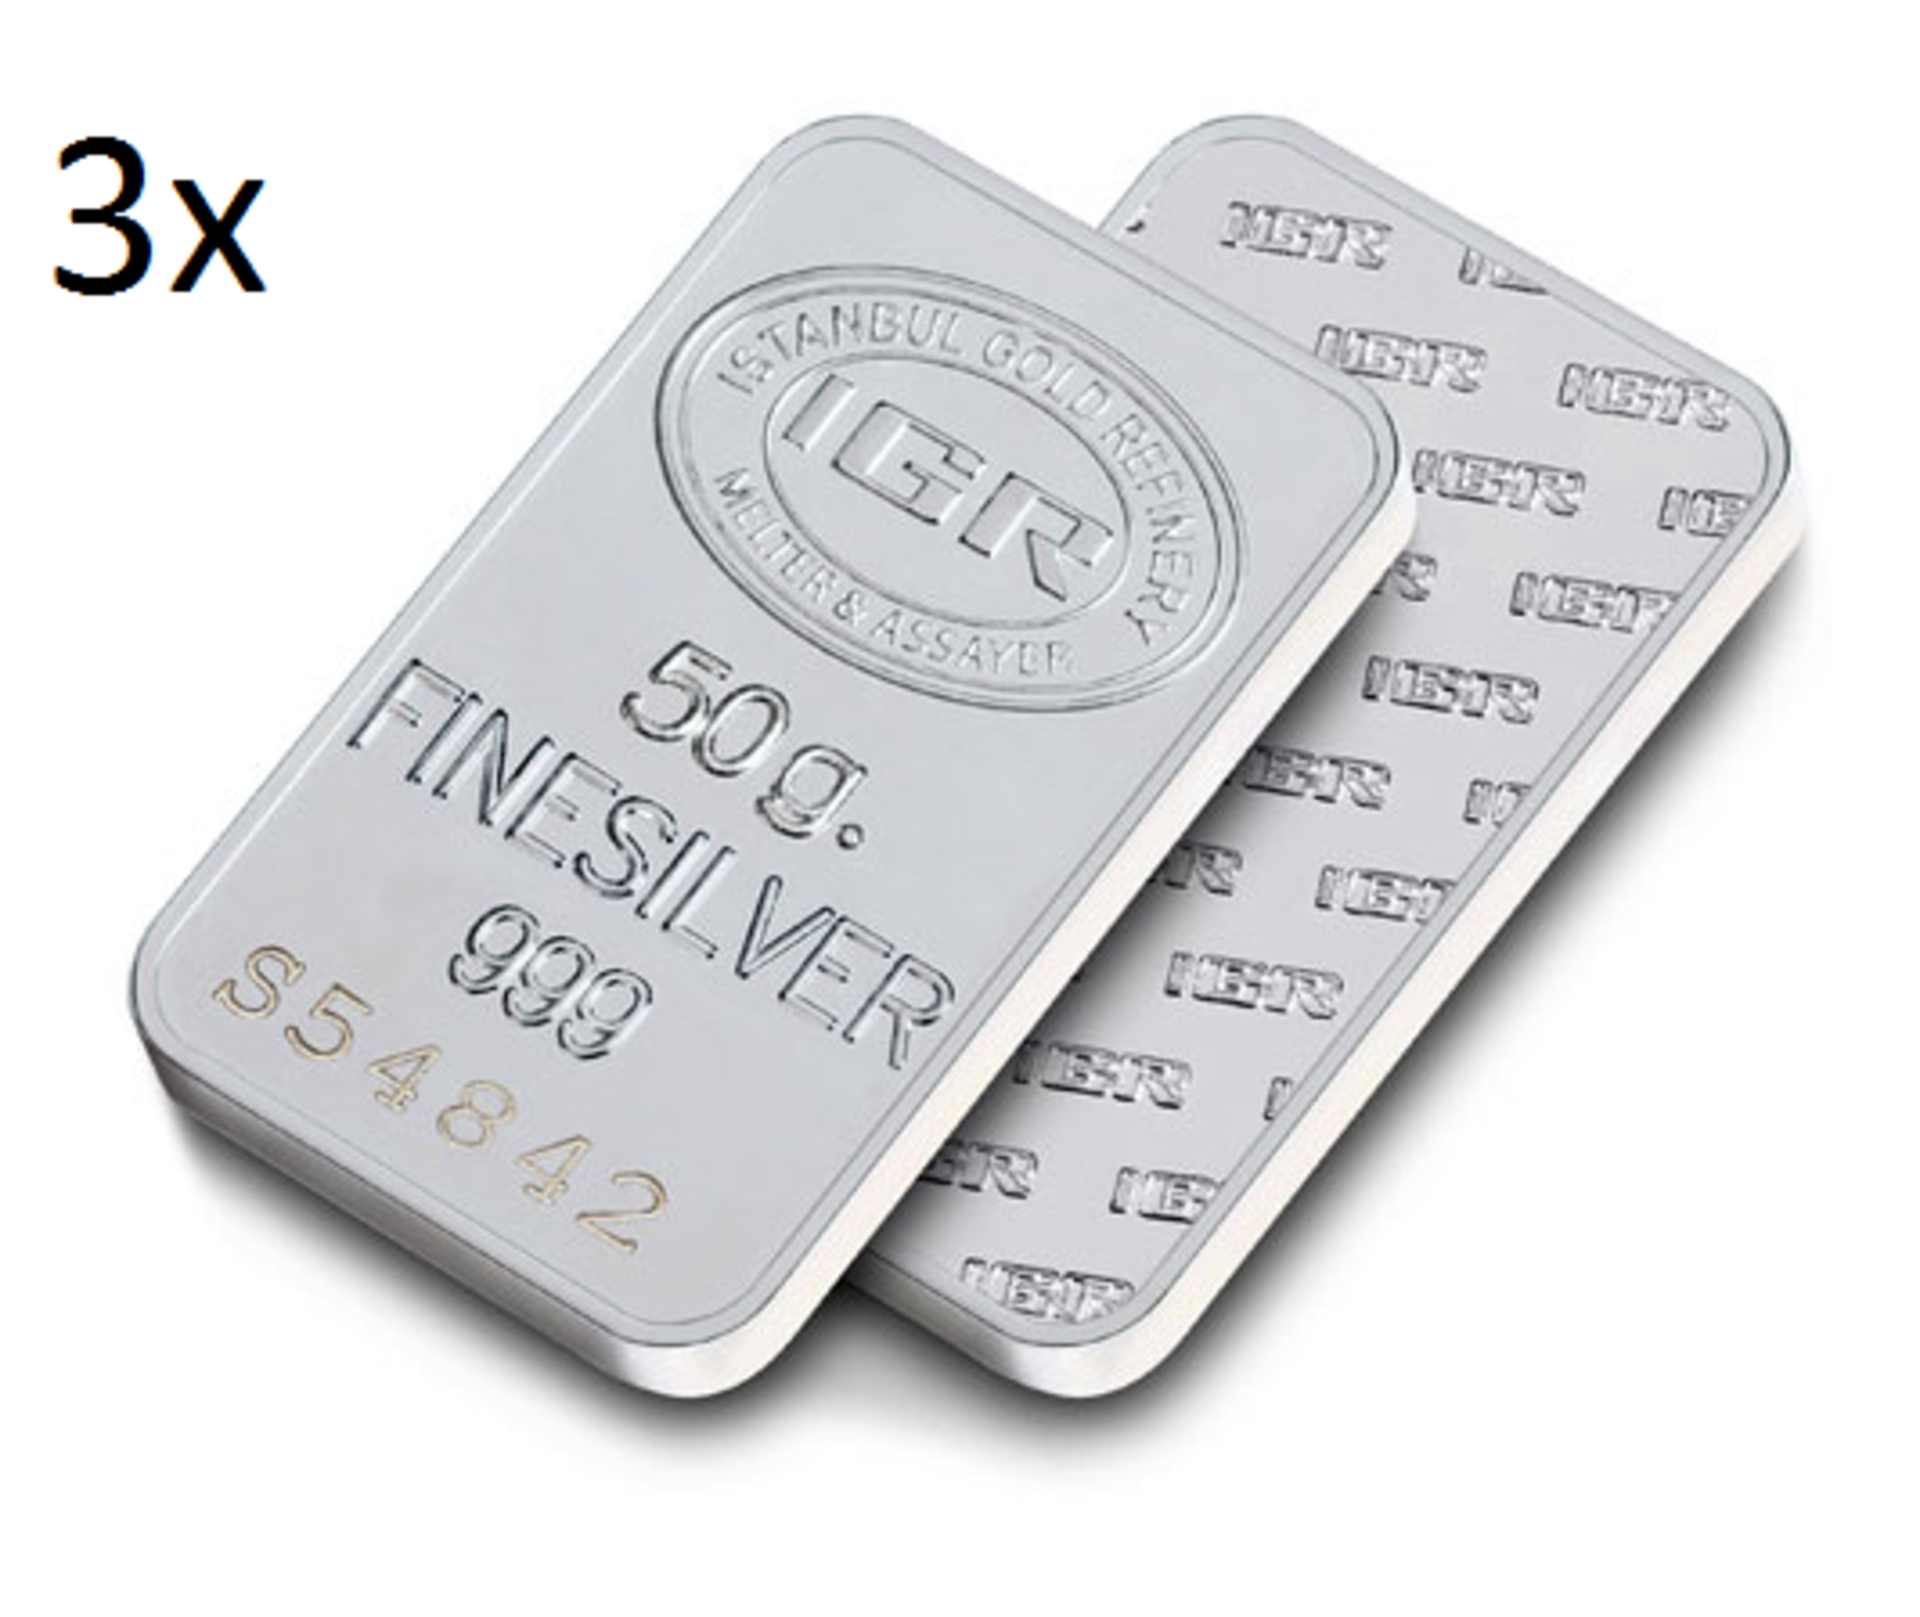 3x 50 gr Silver Investment Bar (99.9%)